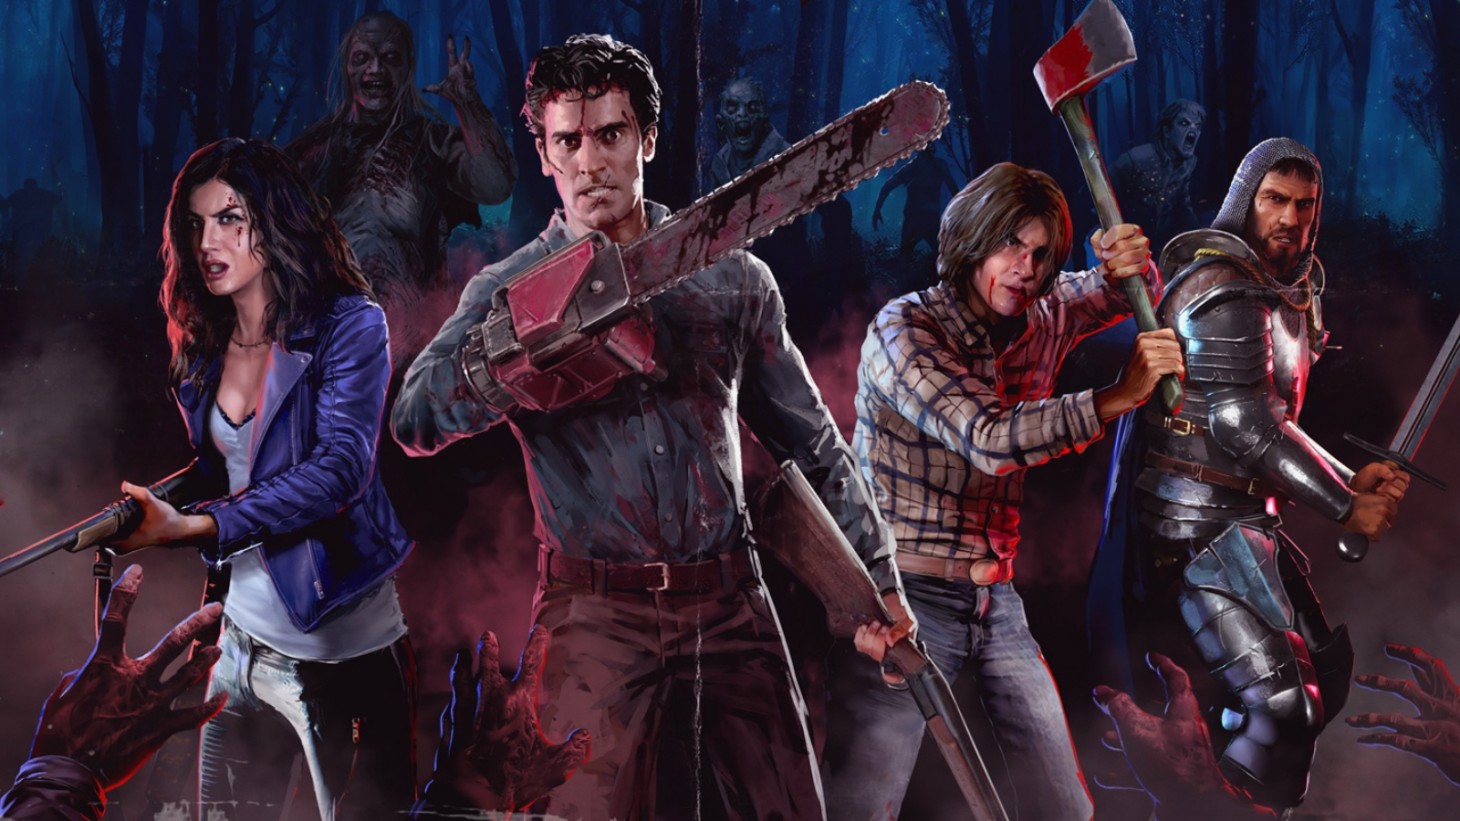 No New Content Coming to Evil Dead: The Game, Servers Will Remain Live